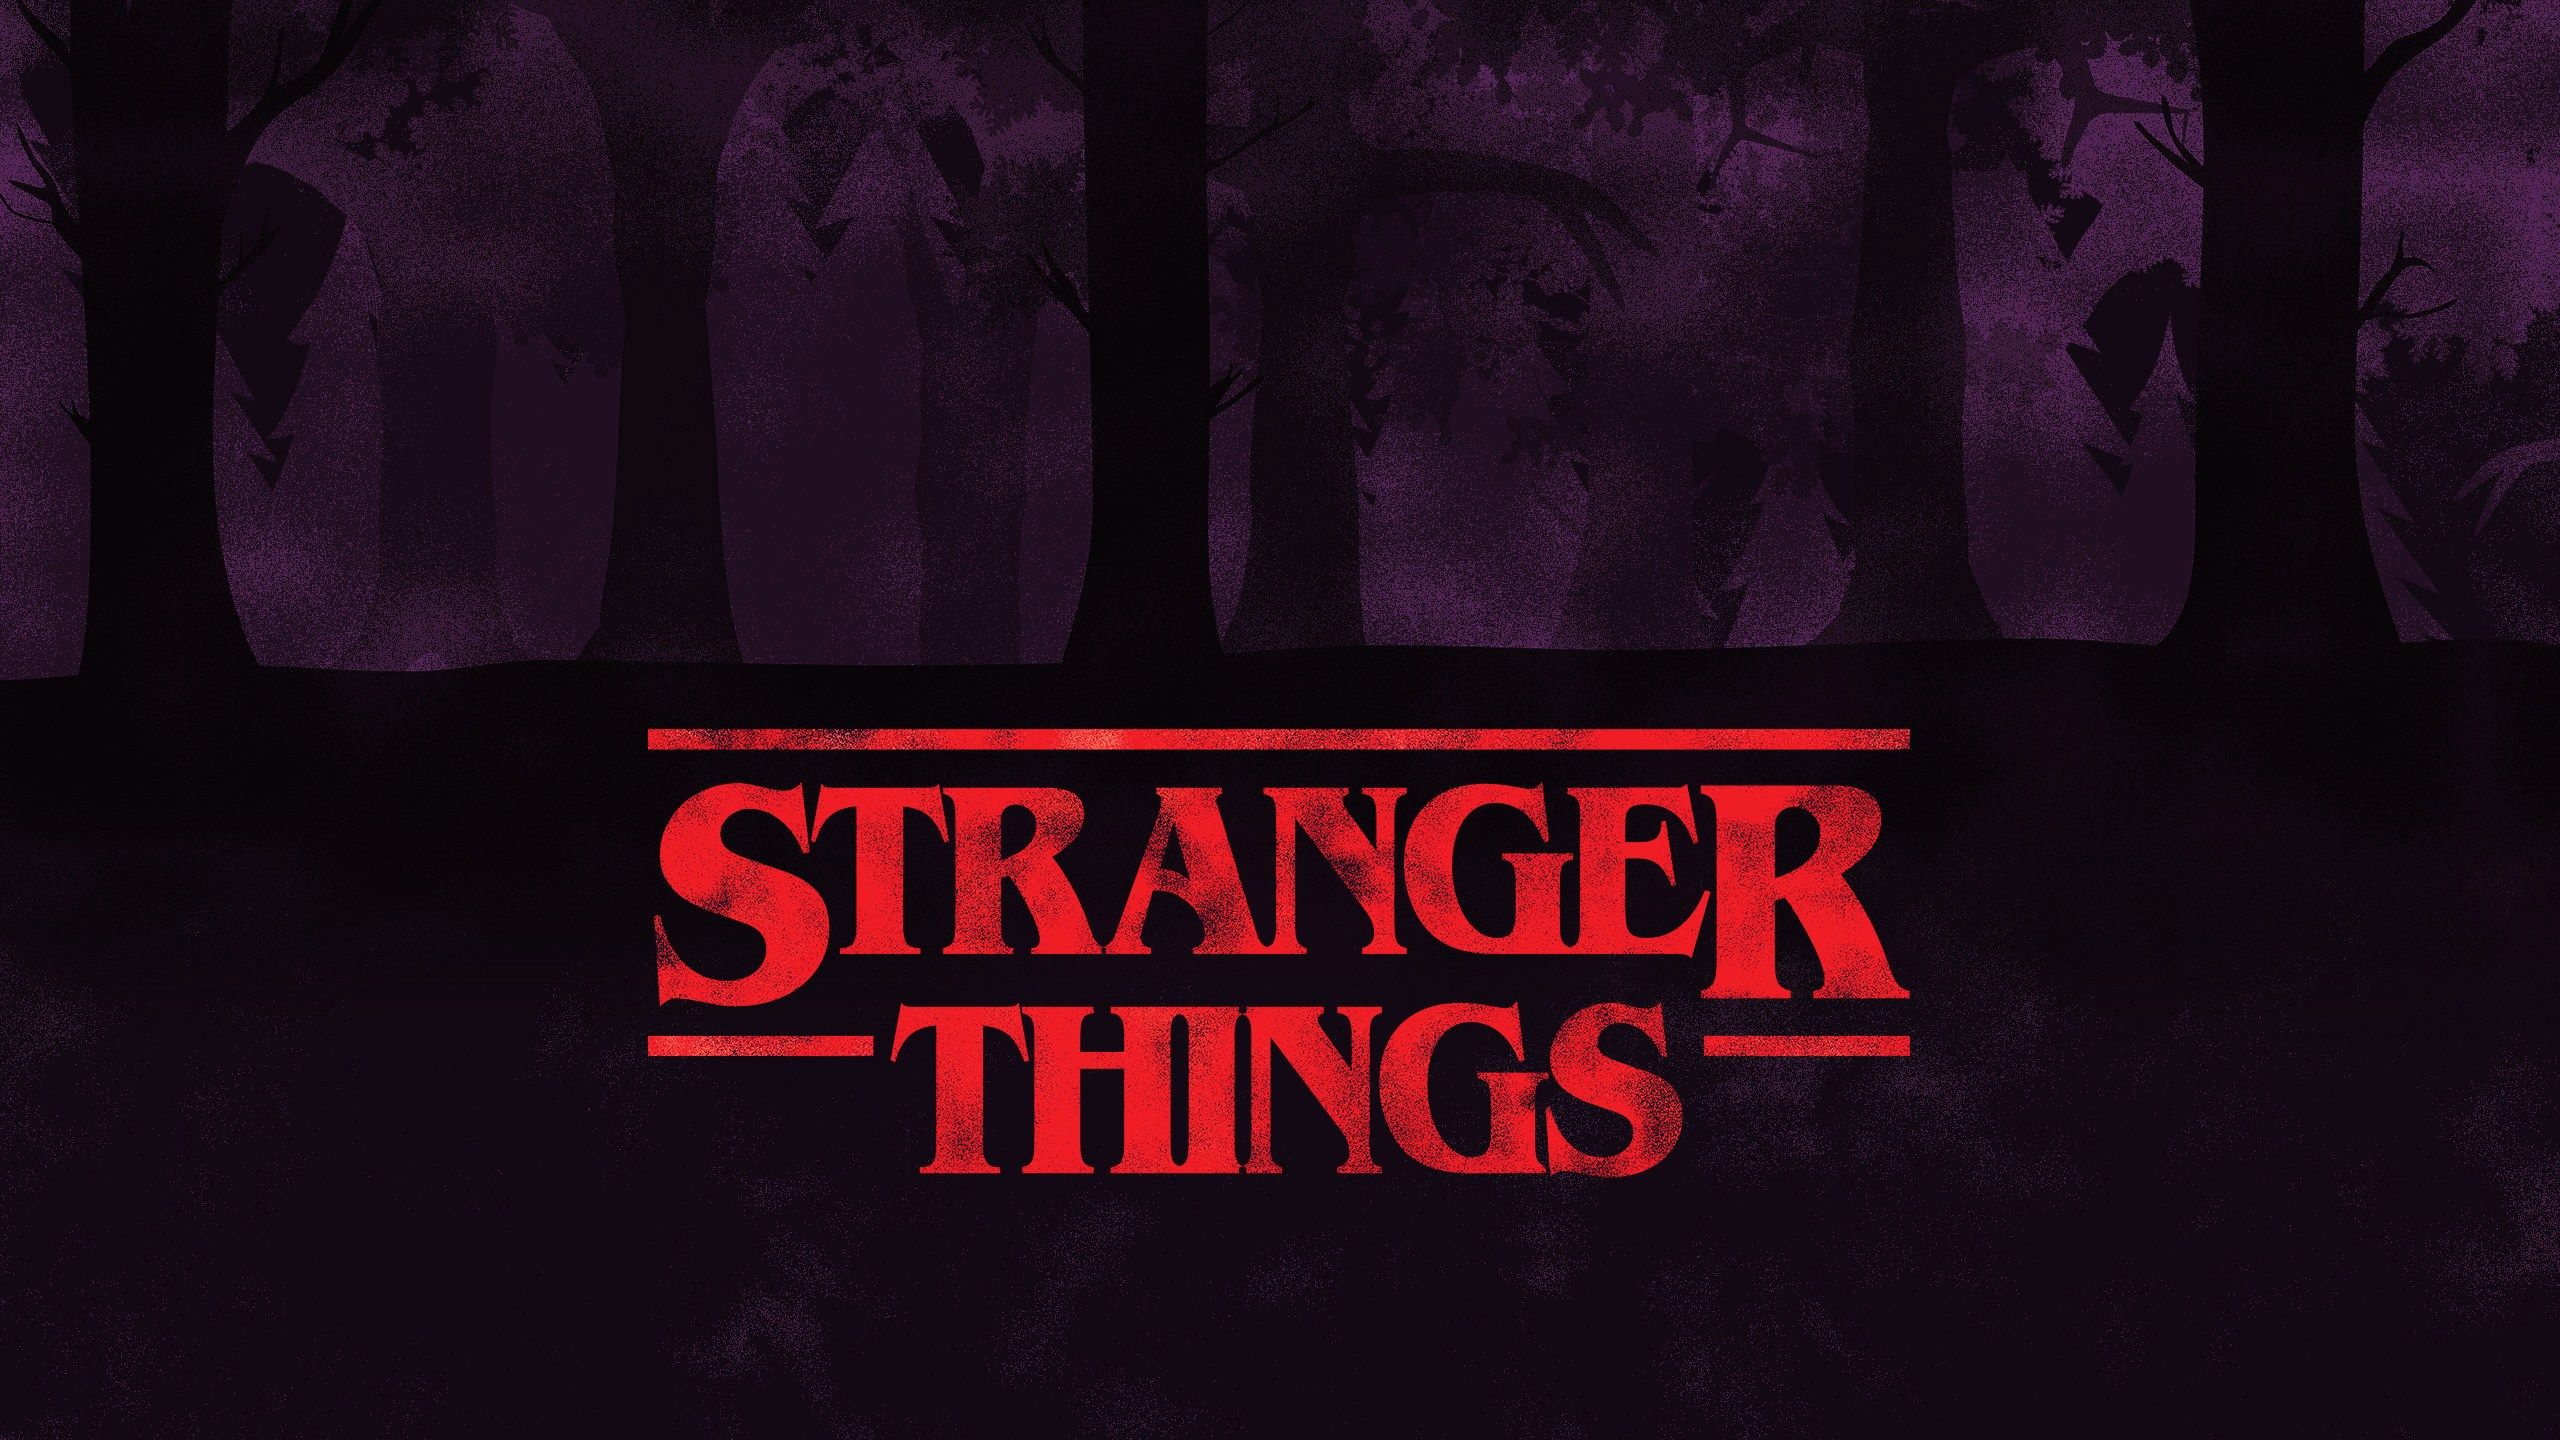 Stranger Things Logo Hd posted by Zoey Thompson.